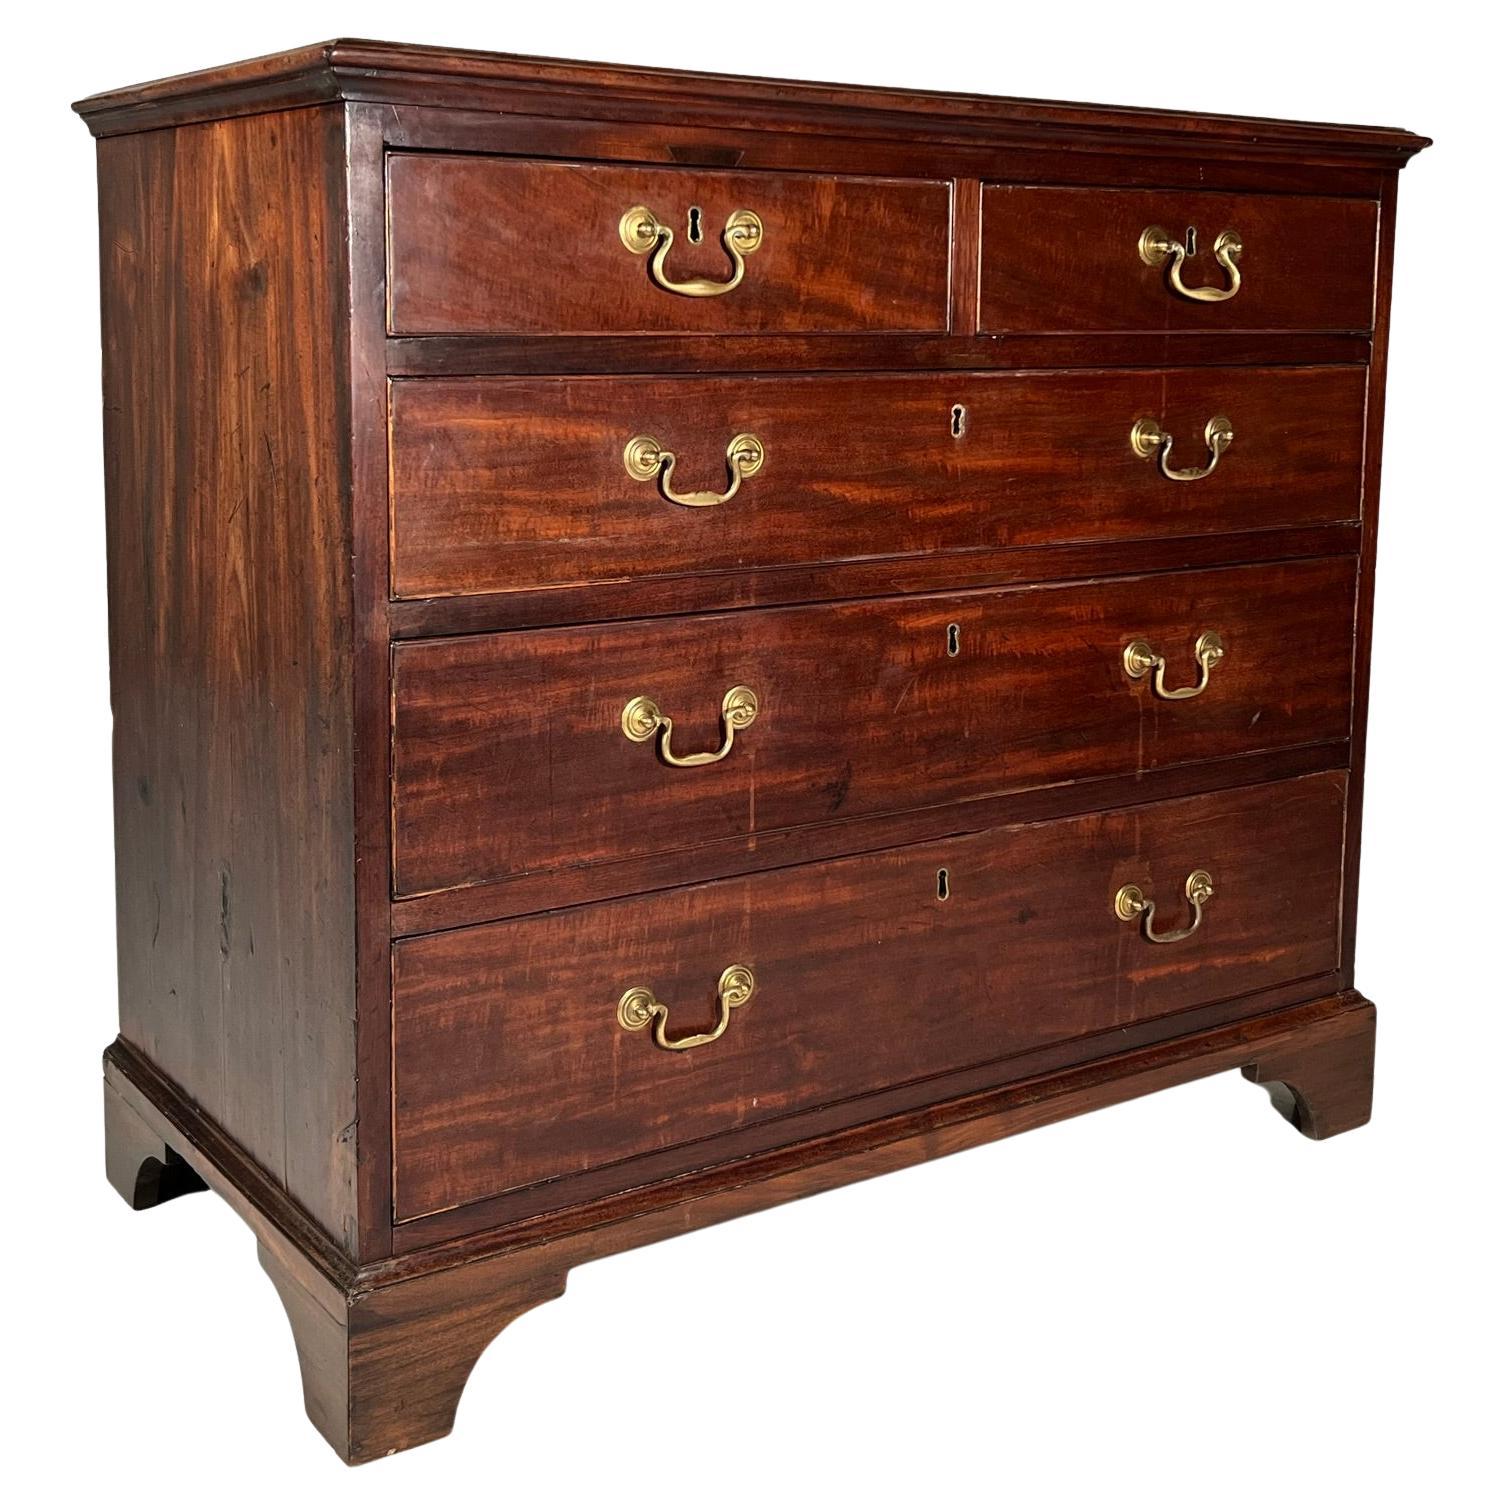 Late 19th Century Georgian Revival Chest of Drawers For Sale